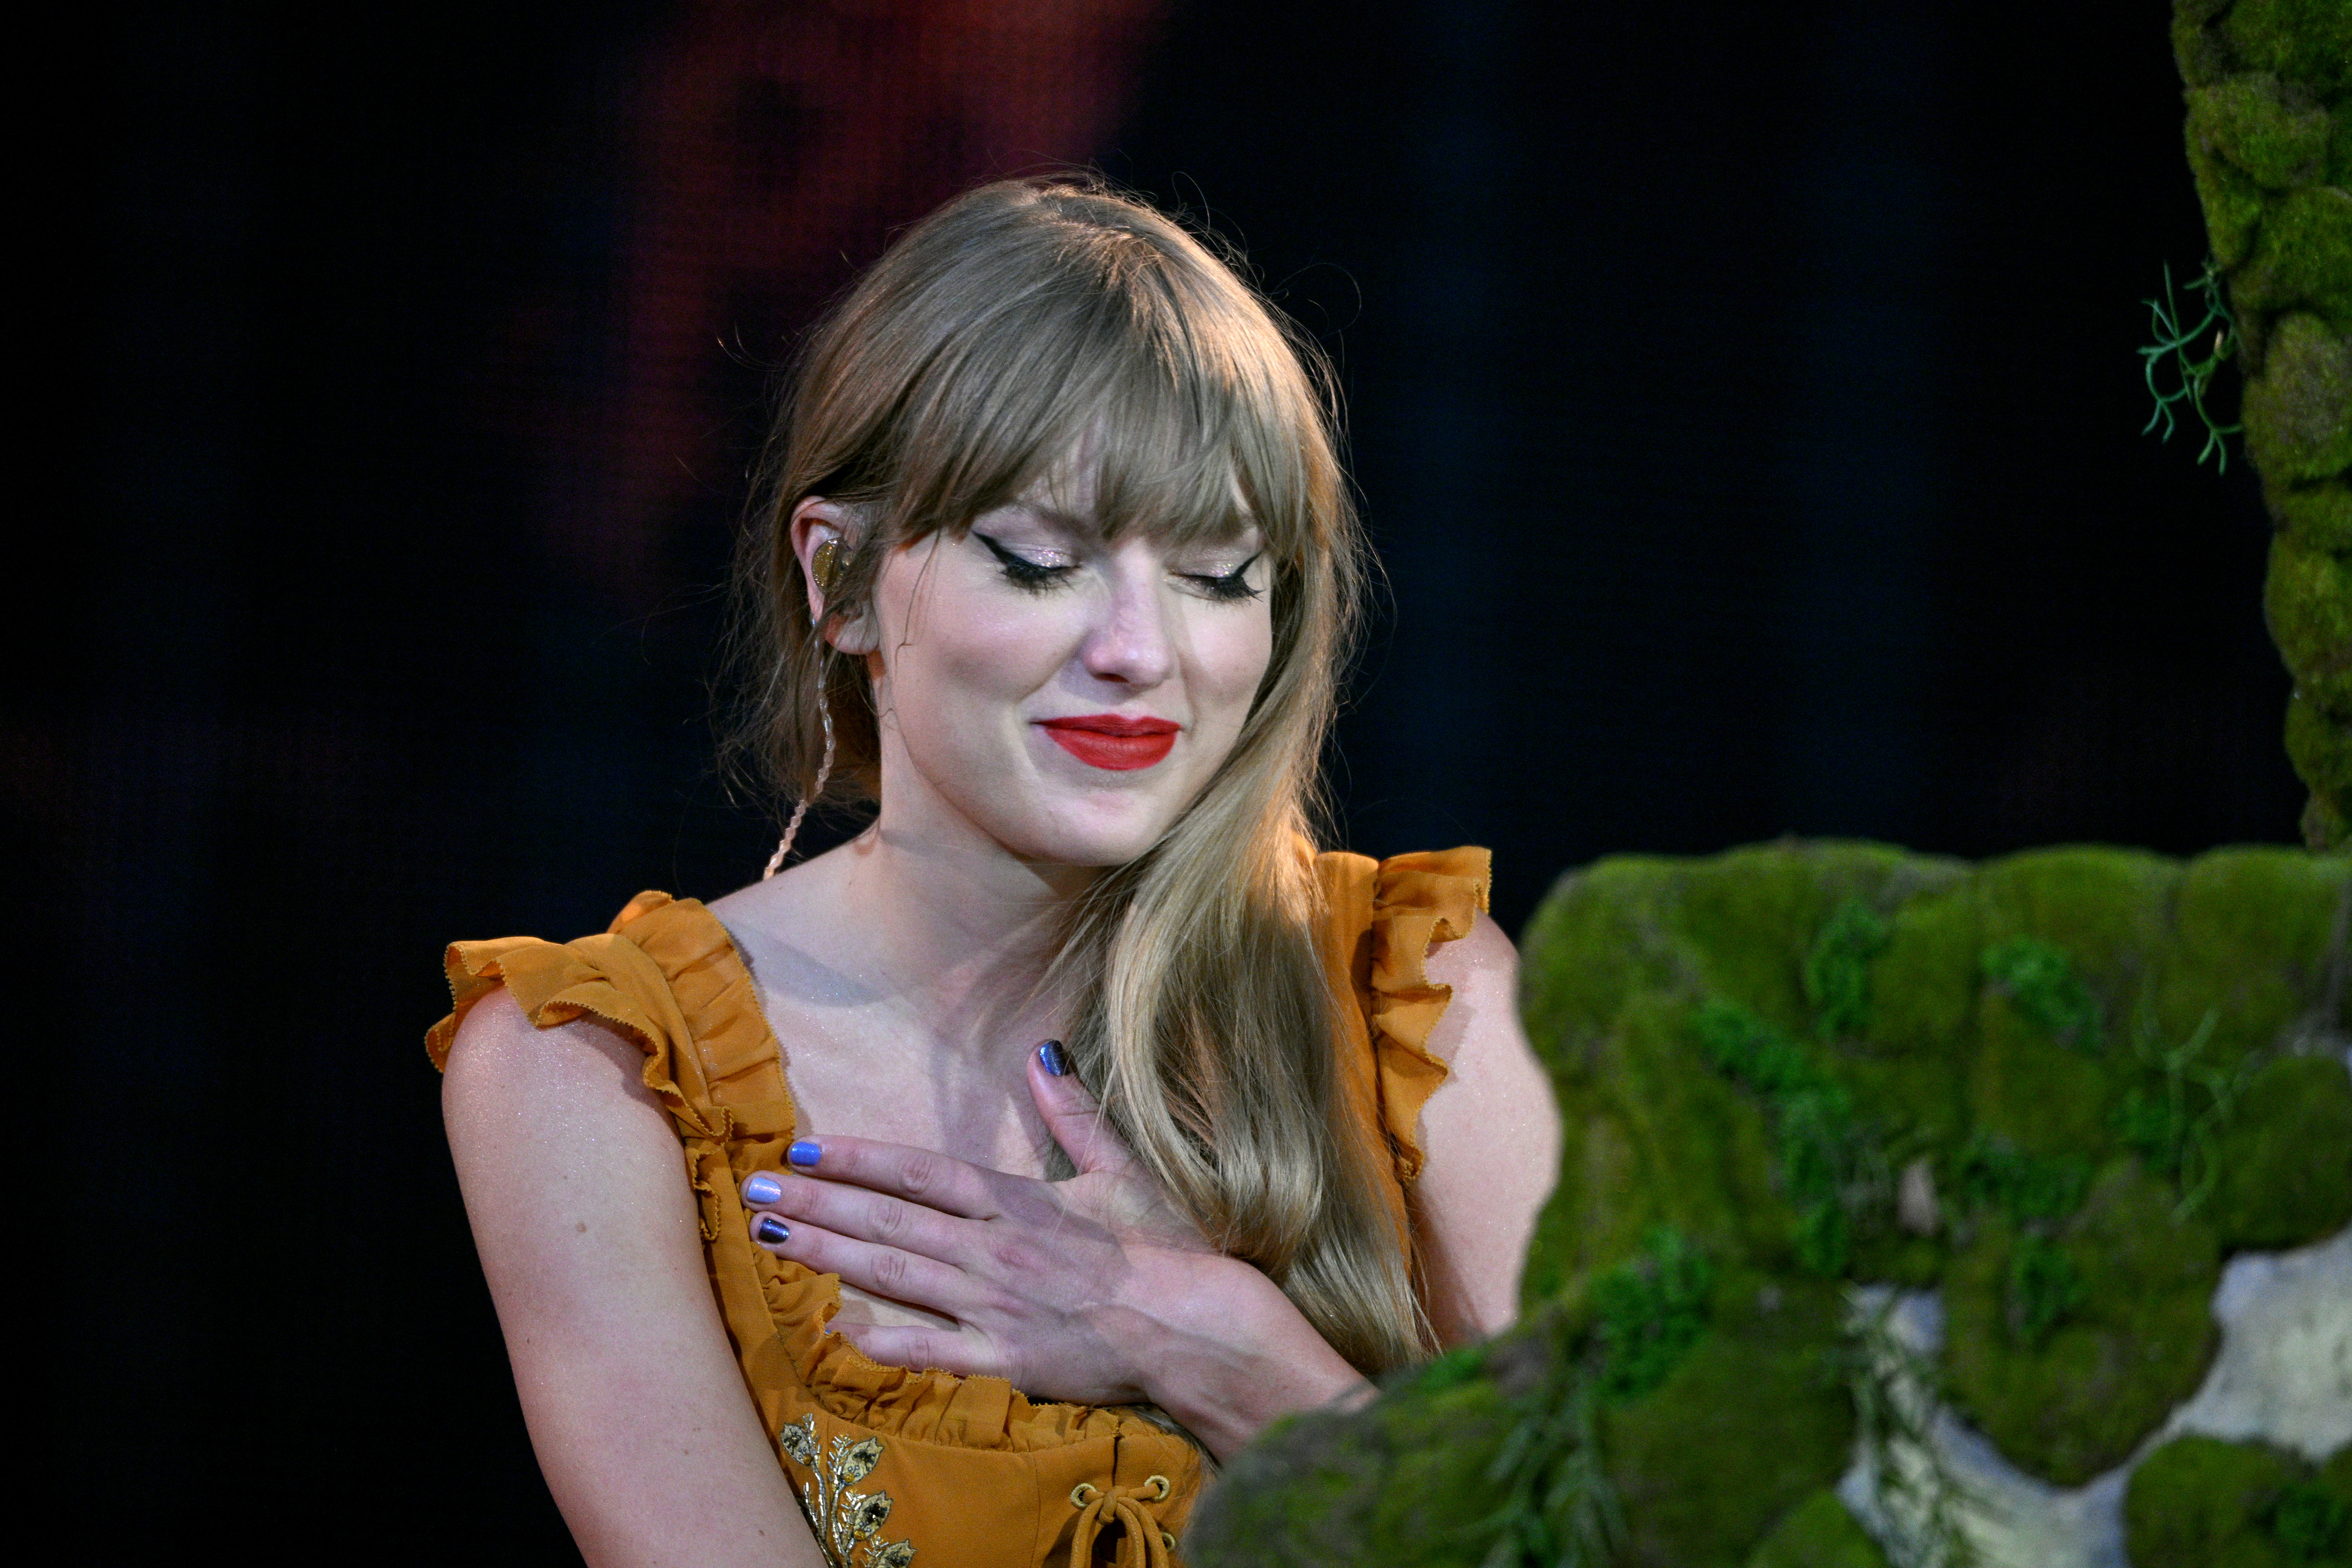 Taylor smiling with her eyes closed and her hand on her chest